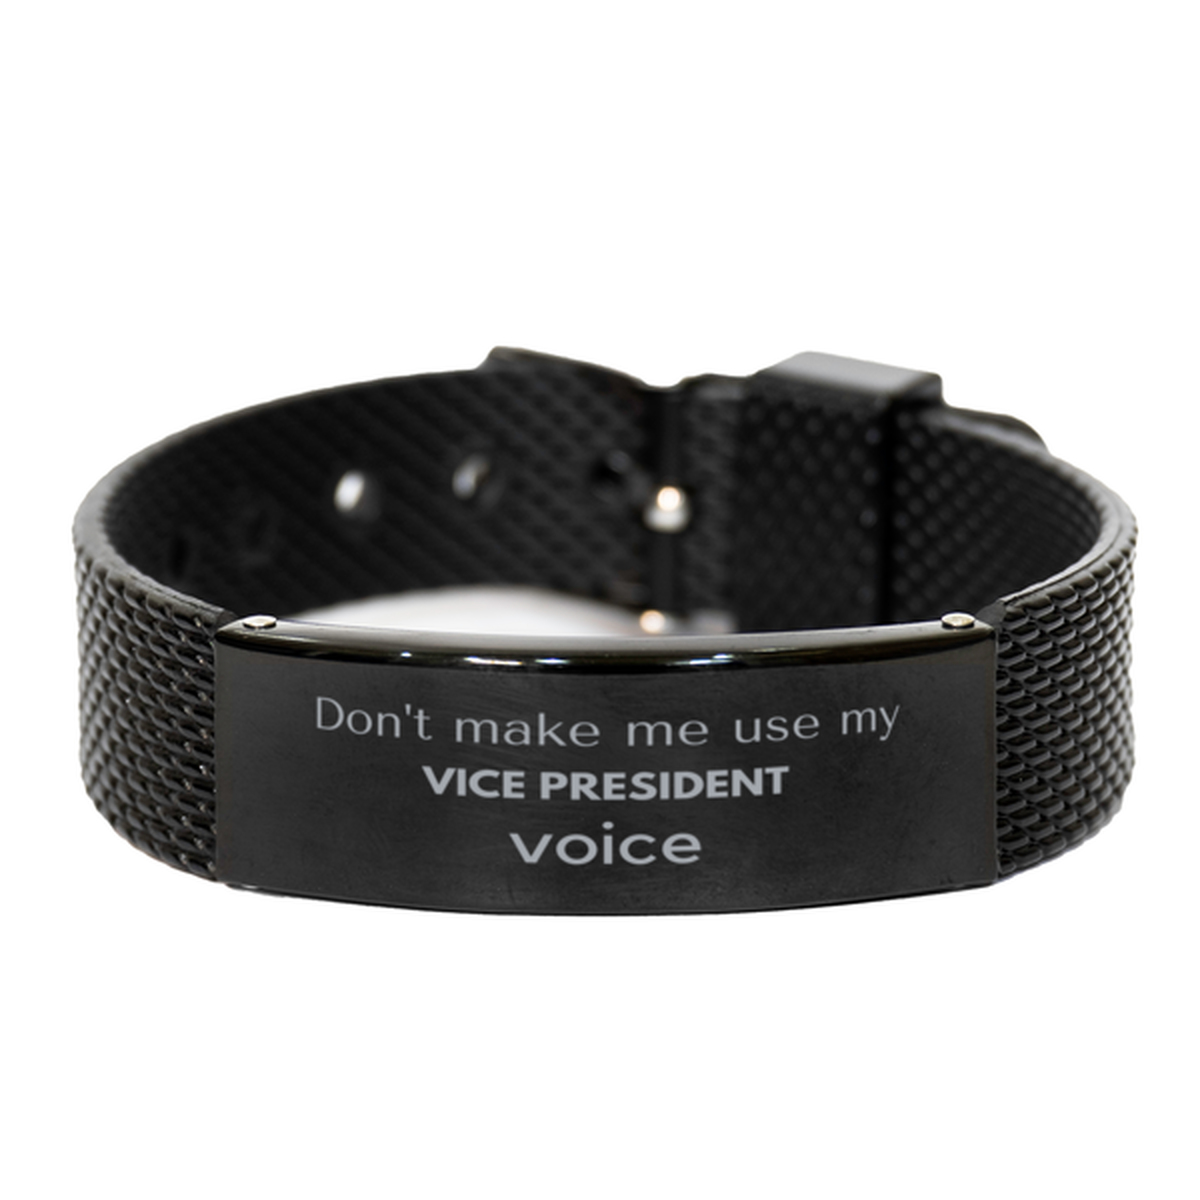 Don't make me use my Vice President voice, Sarcasm Vice President Gifts, Christmas Vice President Black Shark Mesh Bracelet Birthday Unique Gifts For Vice President Coworkers, Men, Women, Colleague, Friends